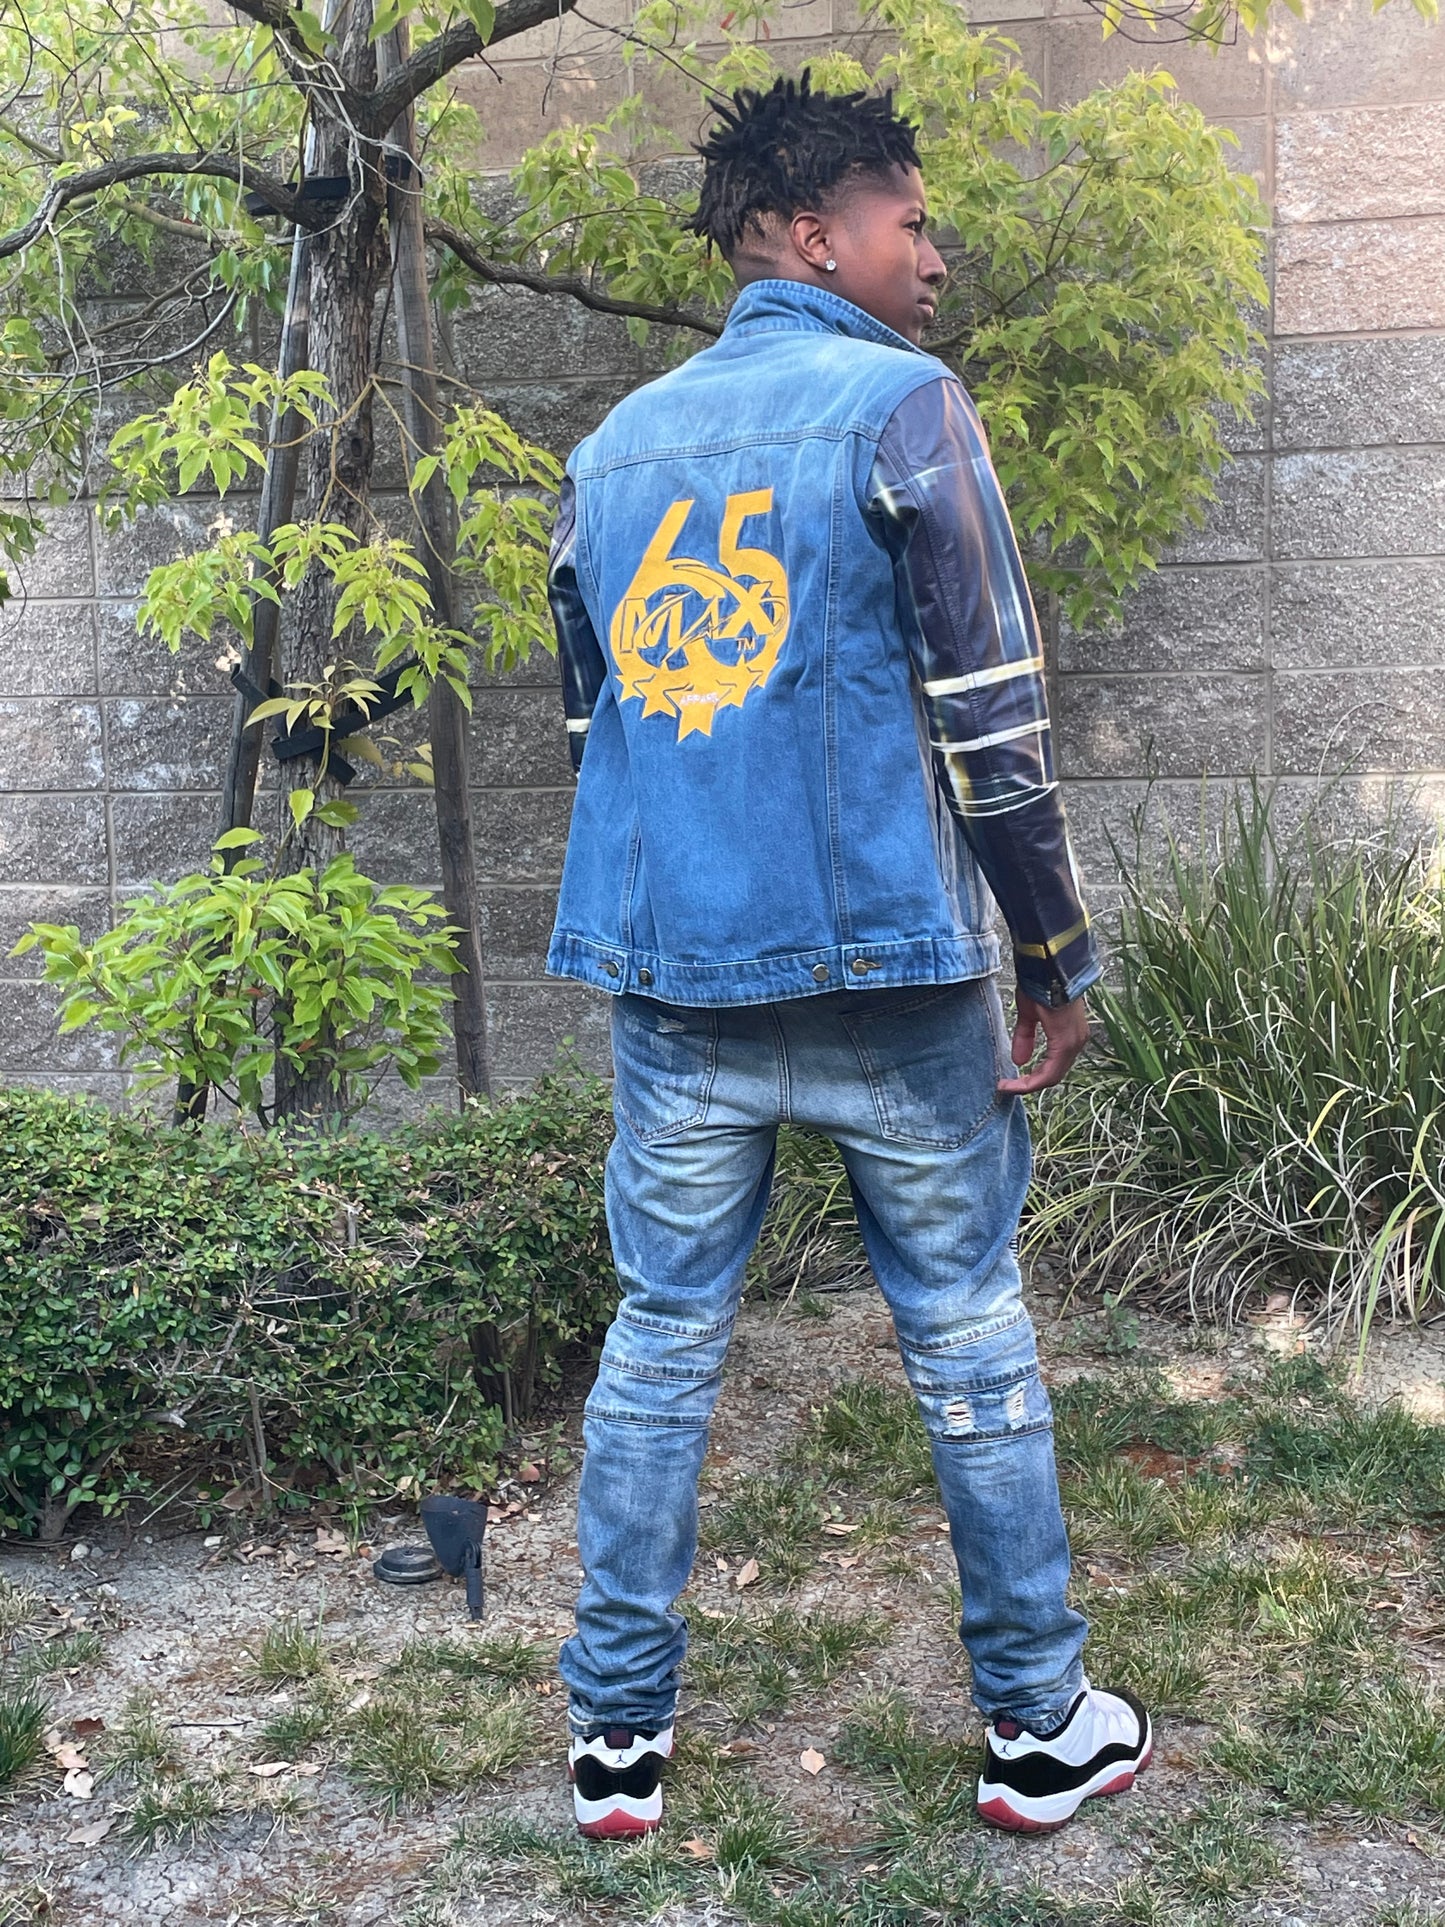 65 Max Star Leather Jean Jacket